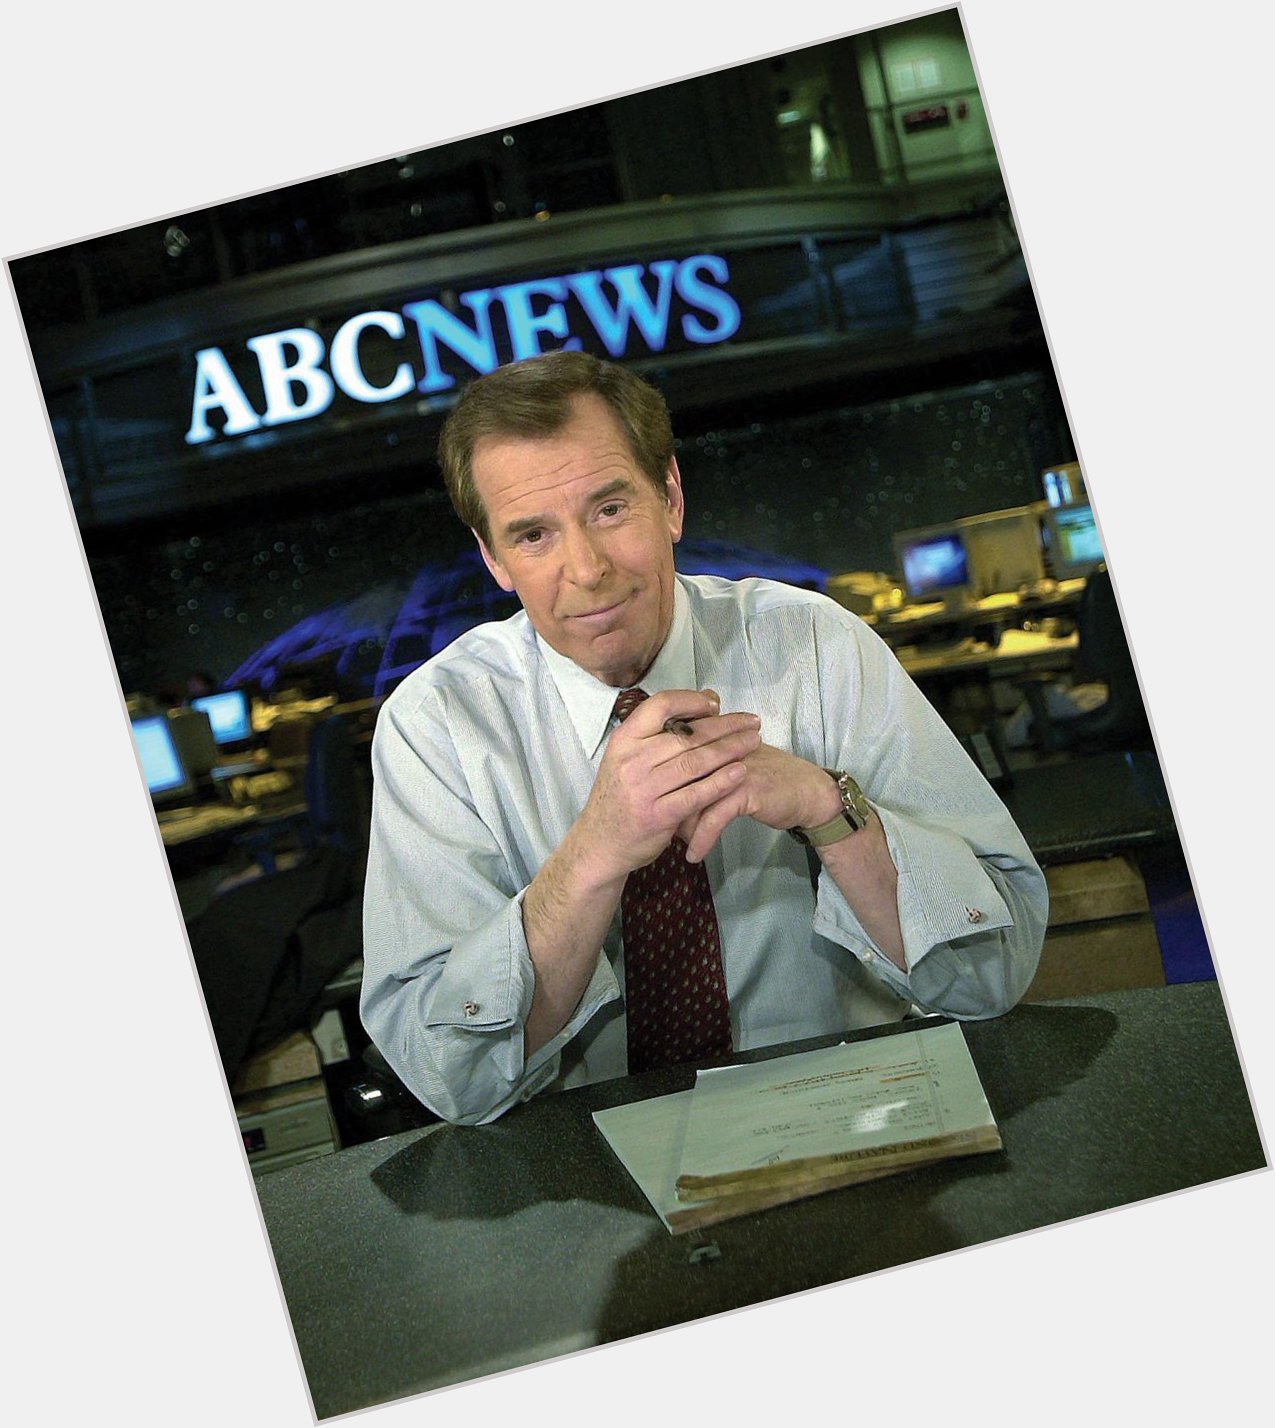 Happy Birthday to Peter Jennings, who would have turned 77 today! 